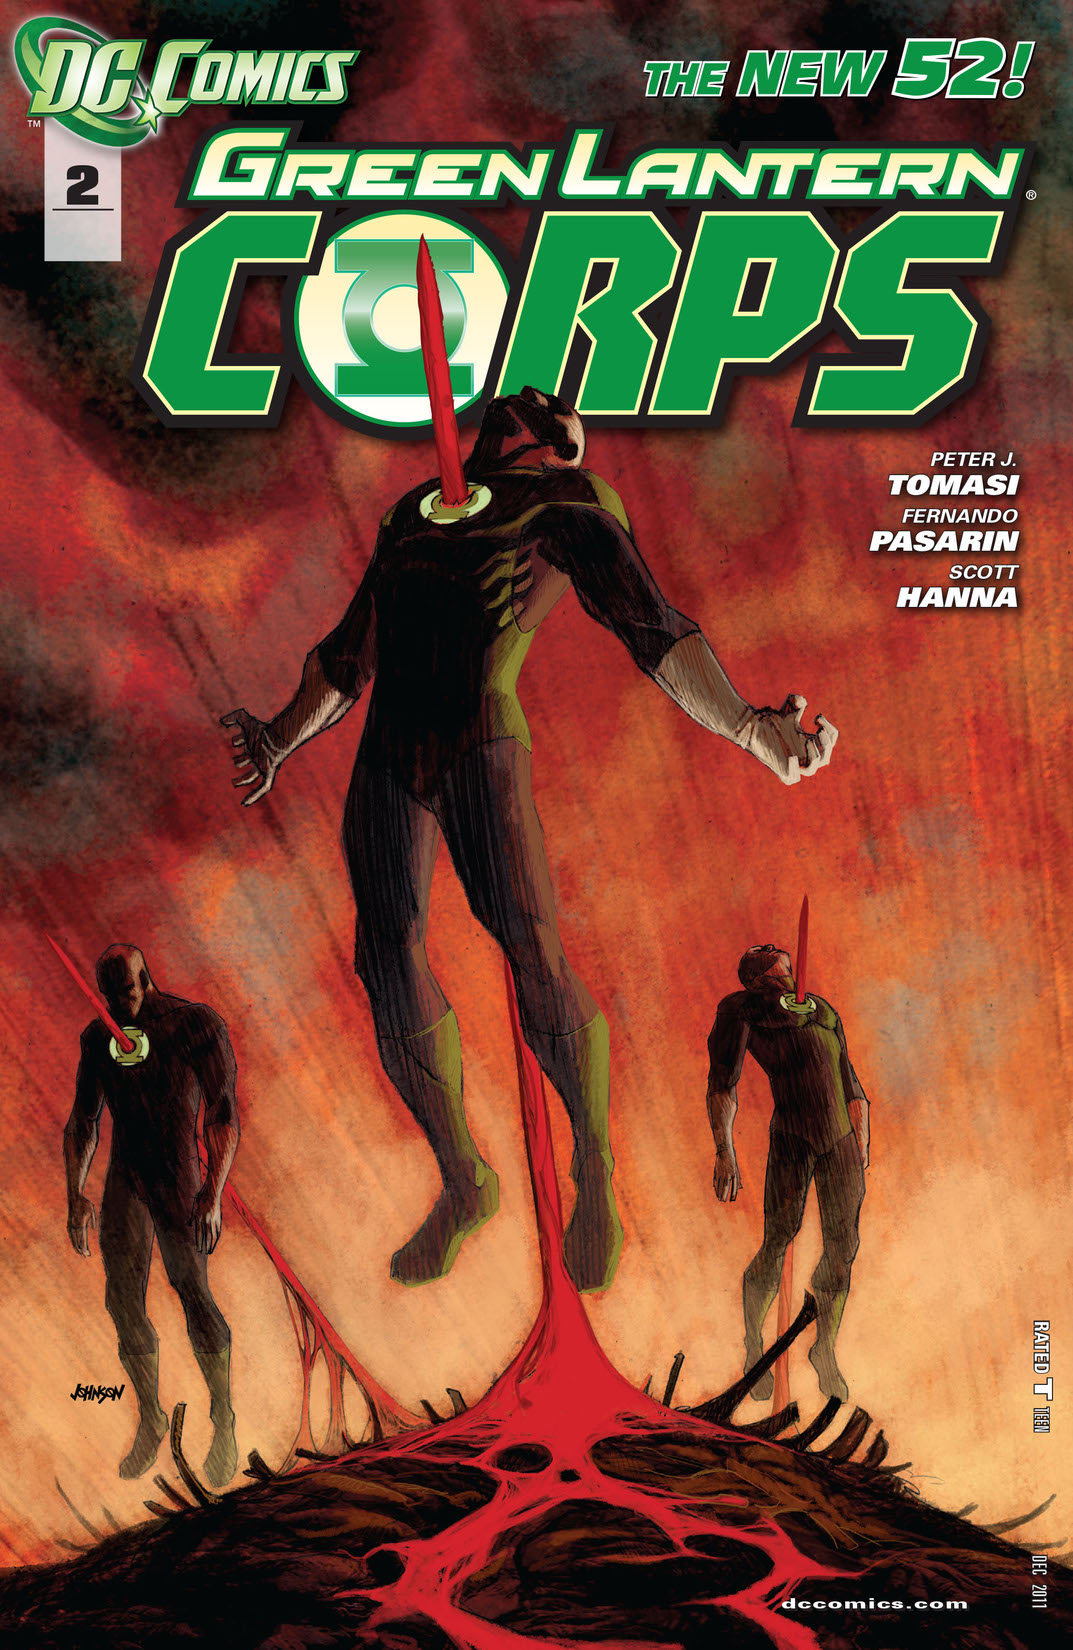 Green Lantern Corps (2011-) #2 preview images